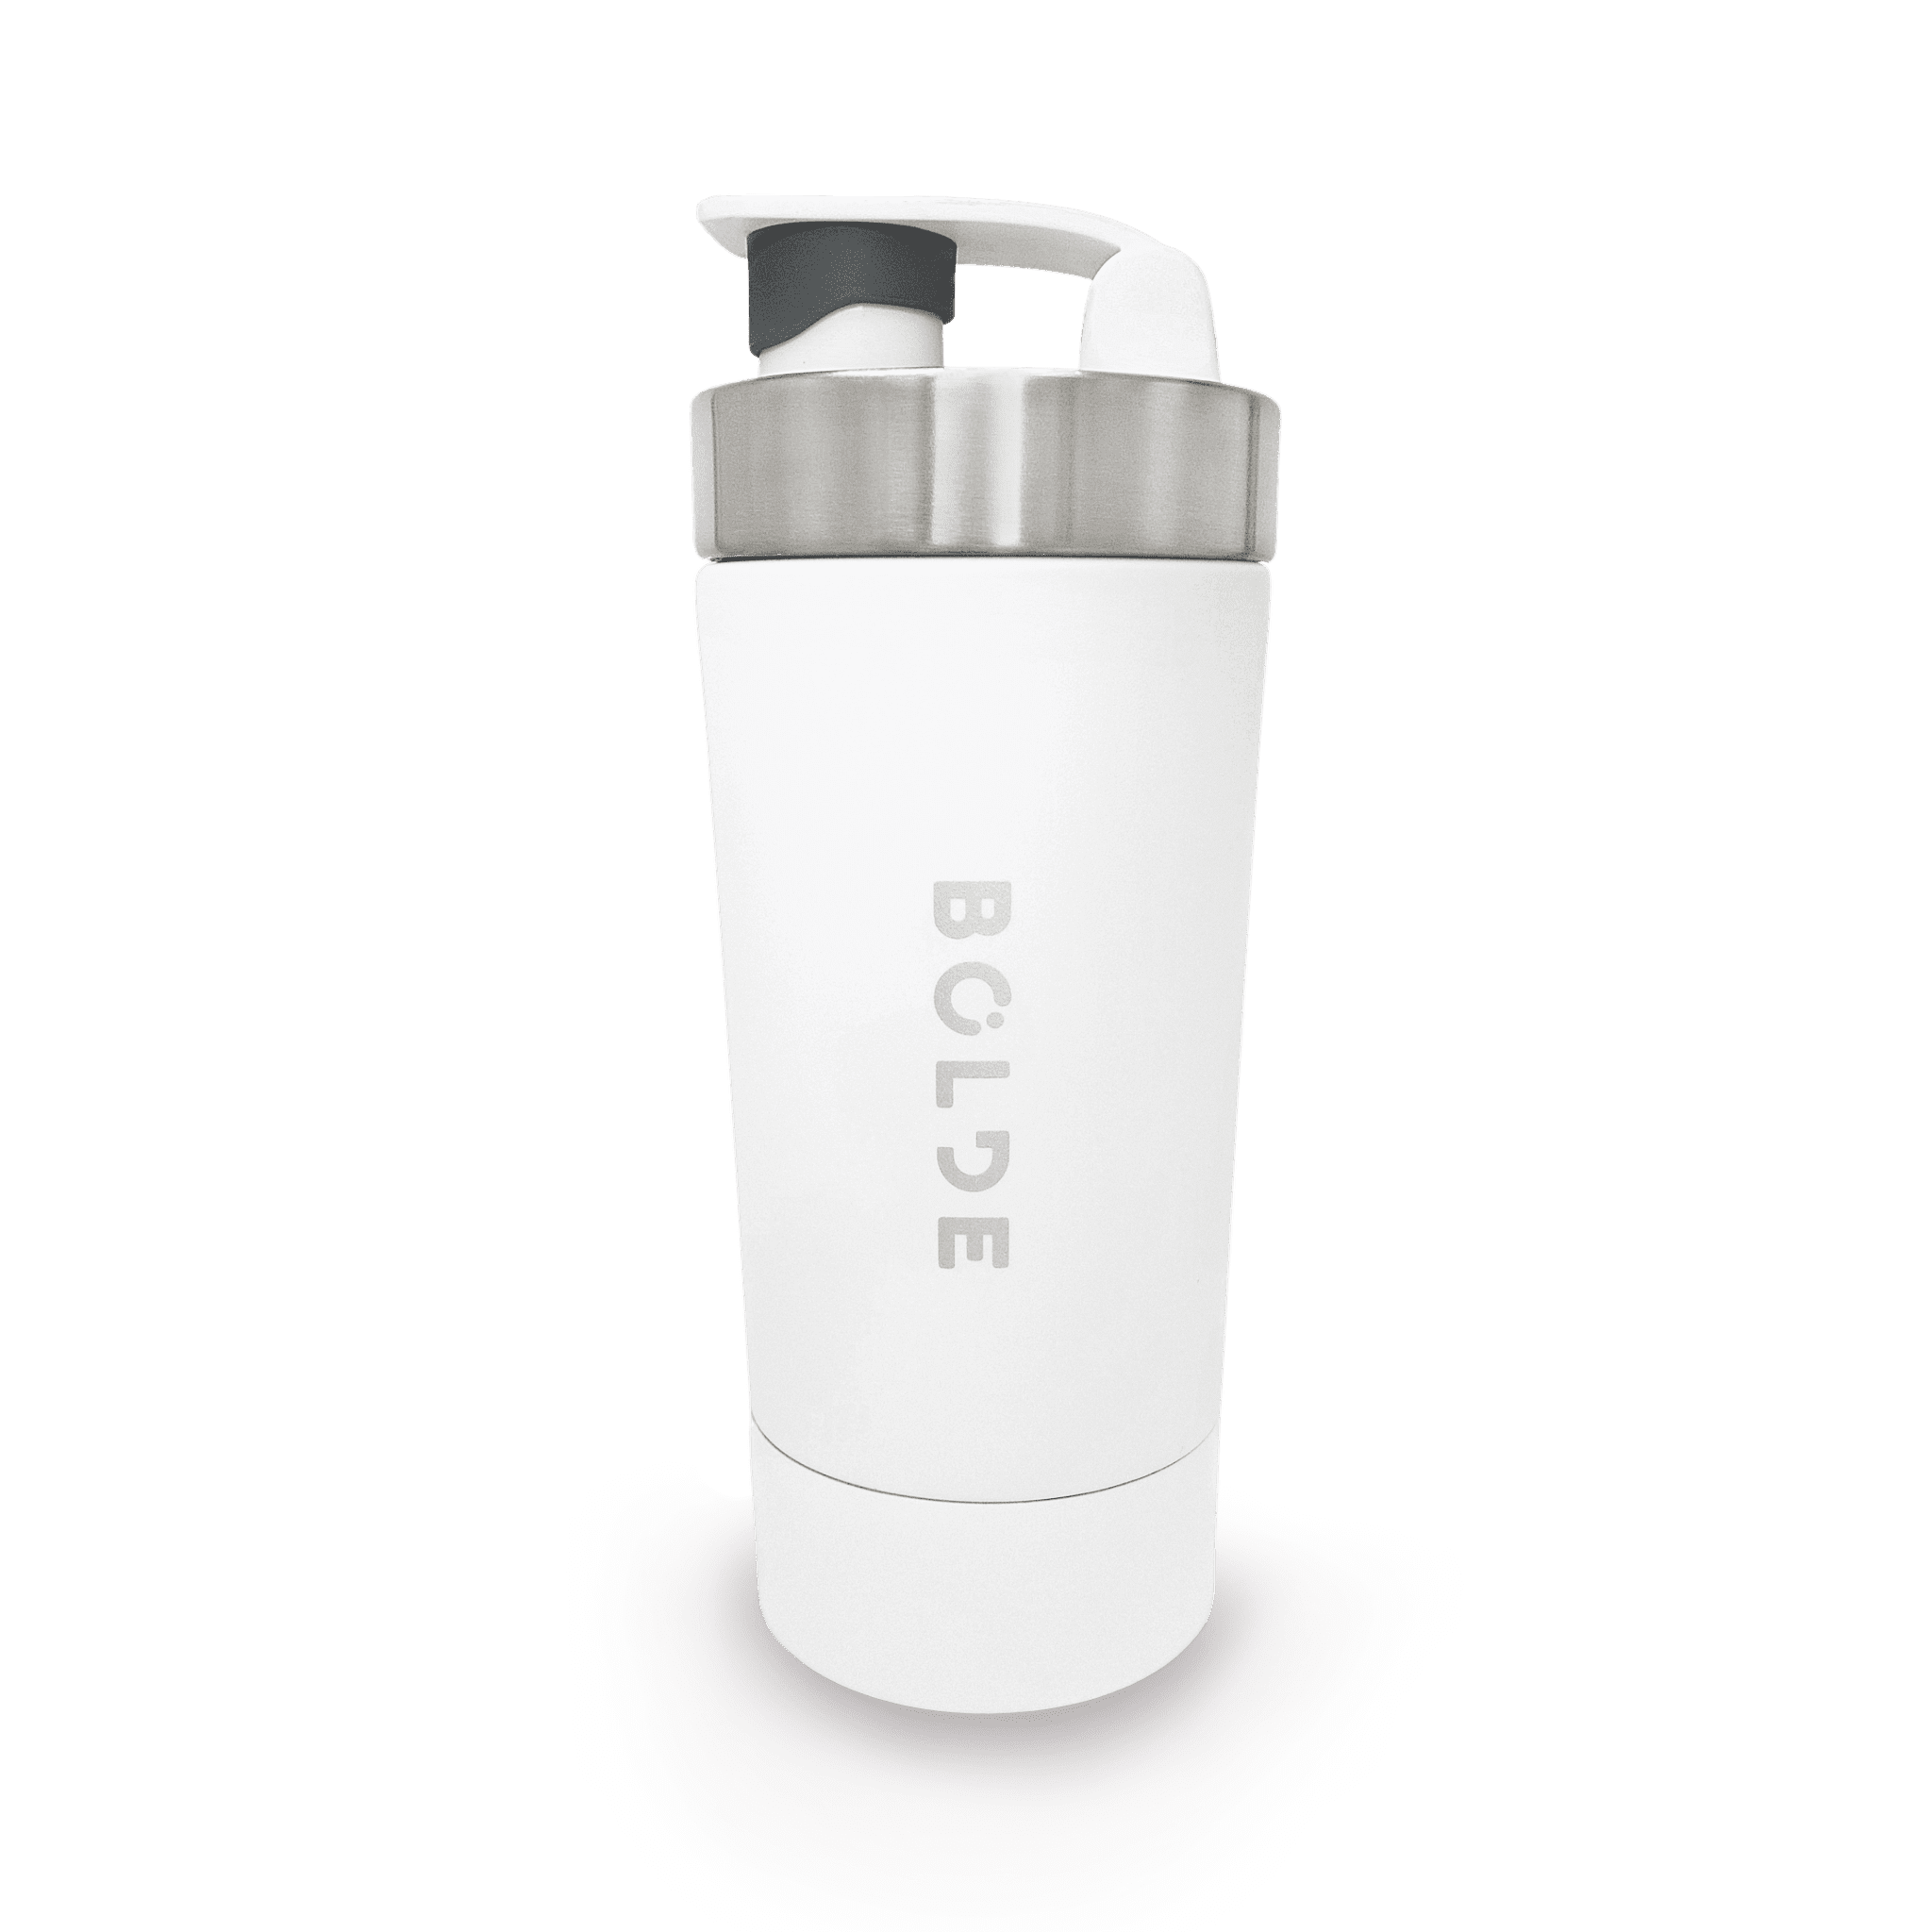 Shaker Bottle Smell: How to deal with it right way? – Beyond Shakers